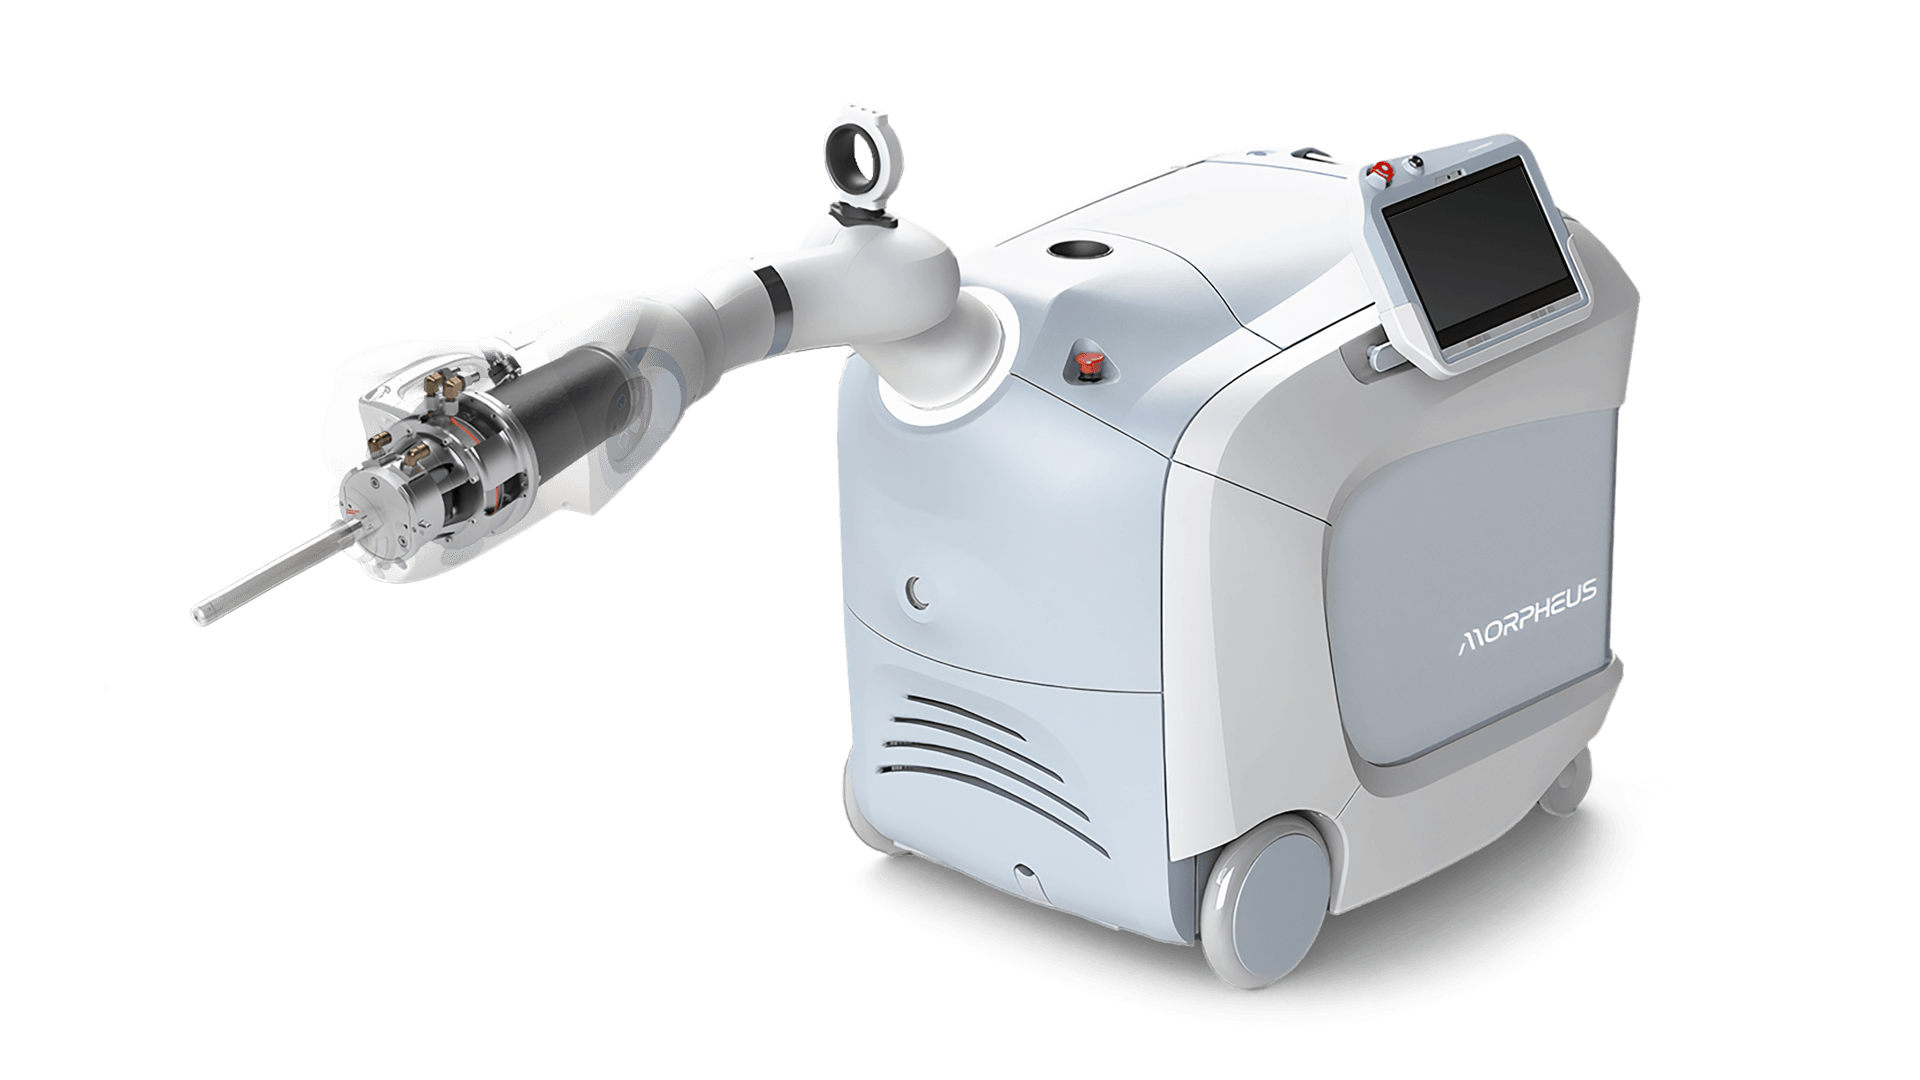 A 3D rendering of the Empyrean Morpheus robotic radiation therapy system.